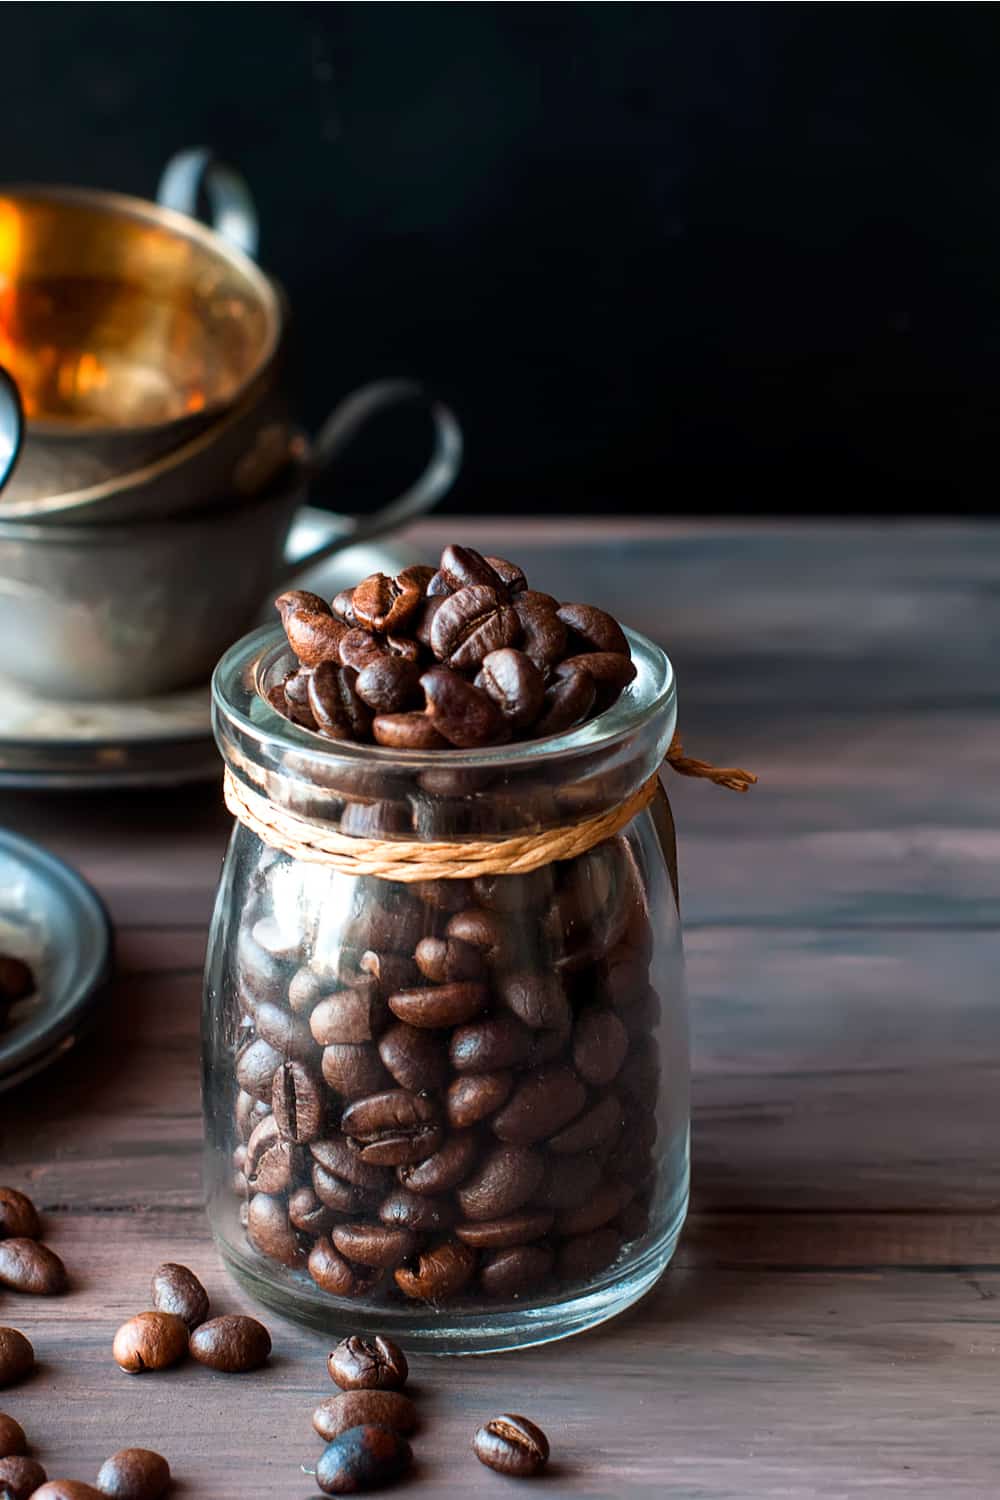 How Long Does Coffee Beans Last